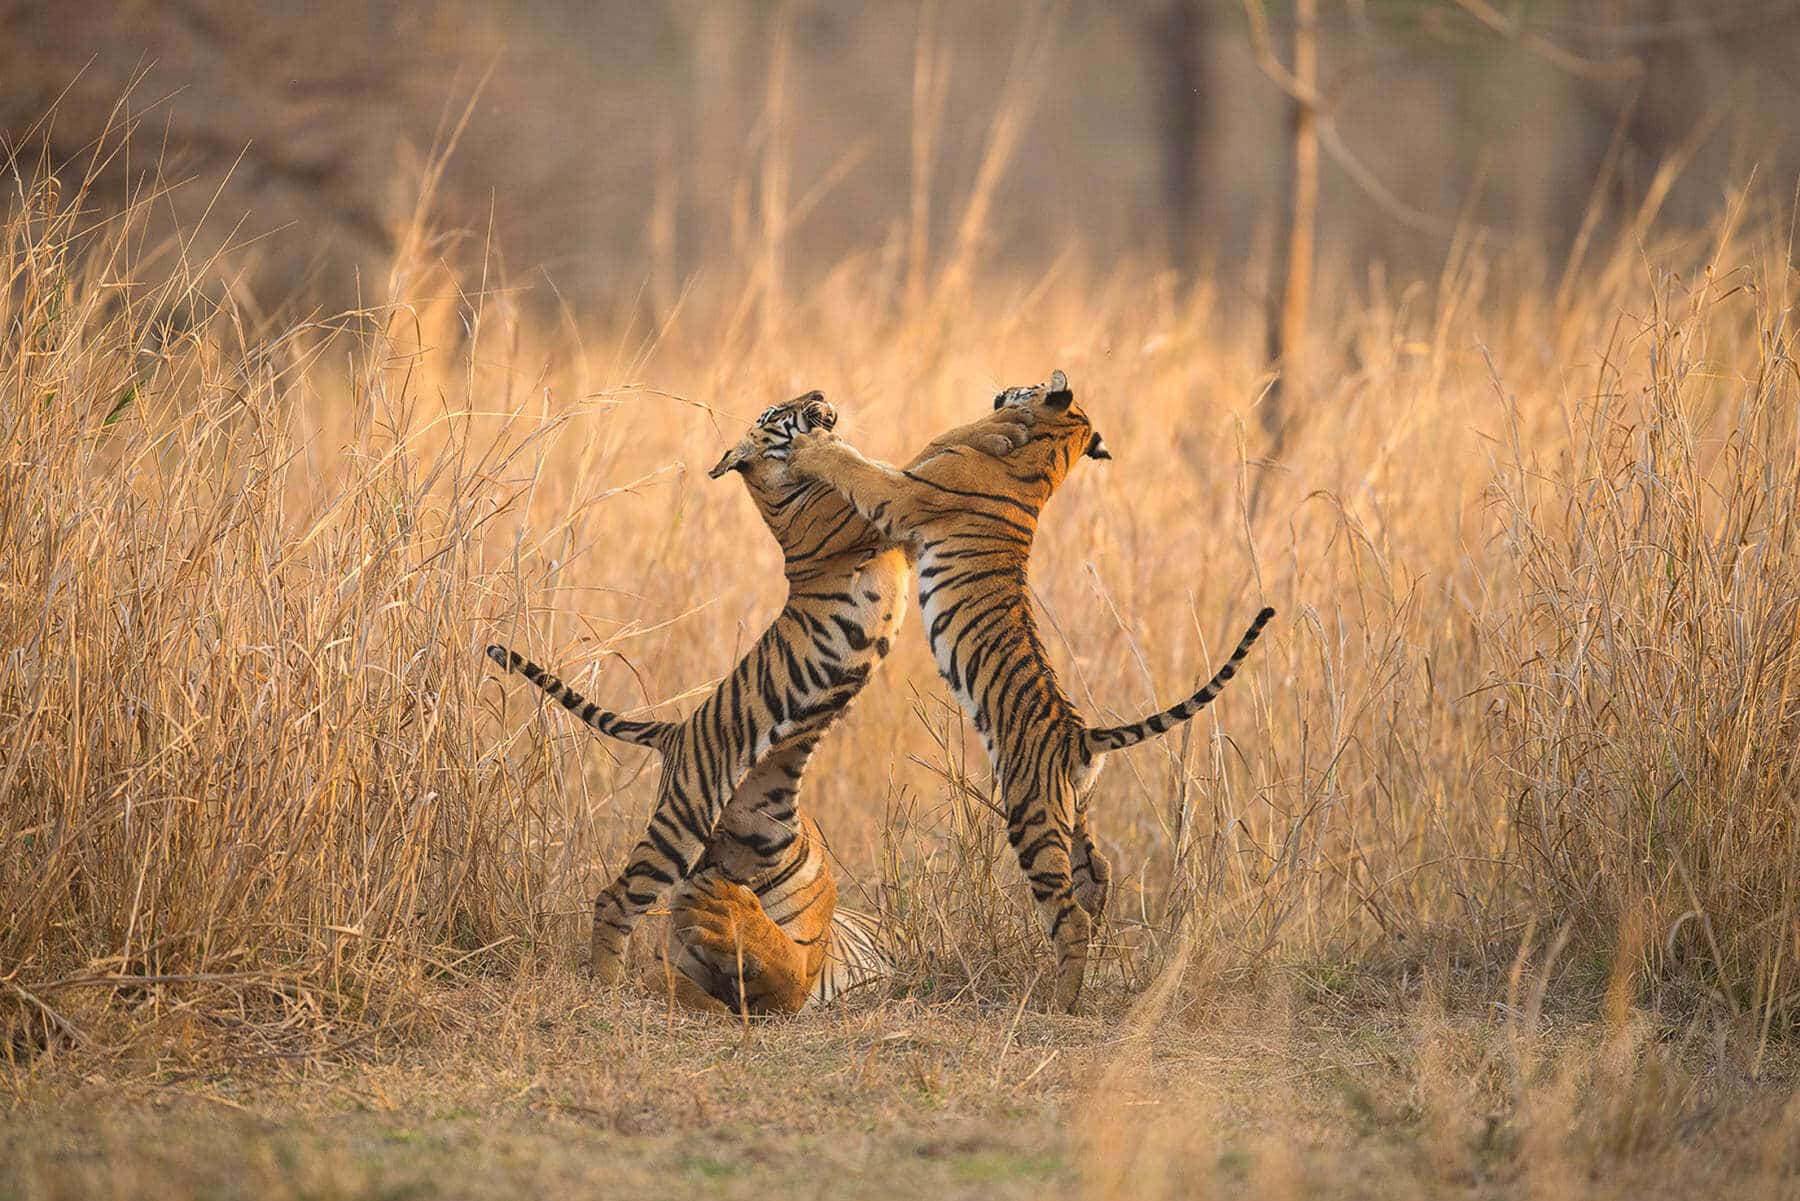 The story of the naughty Tiger cubs